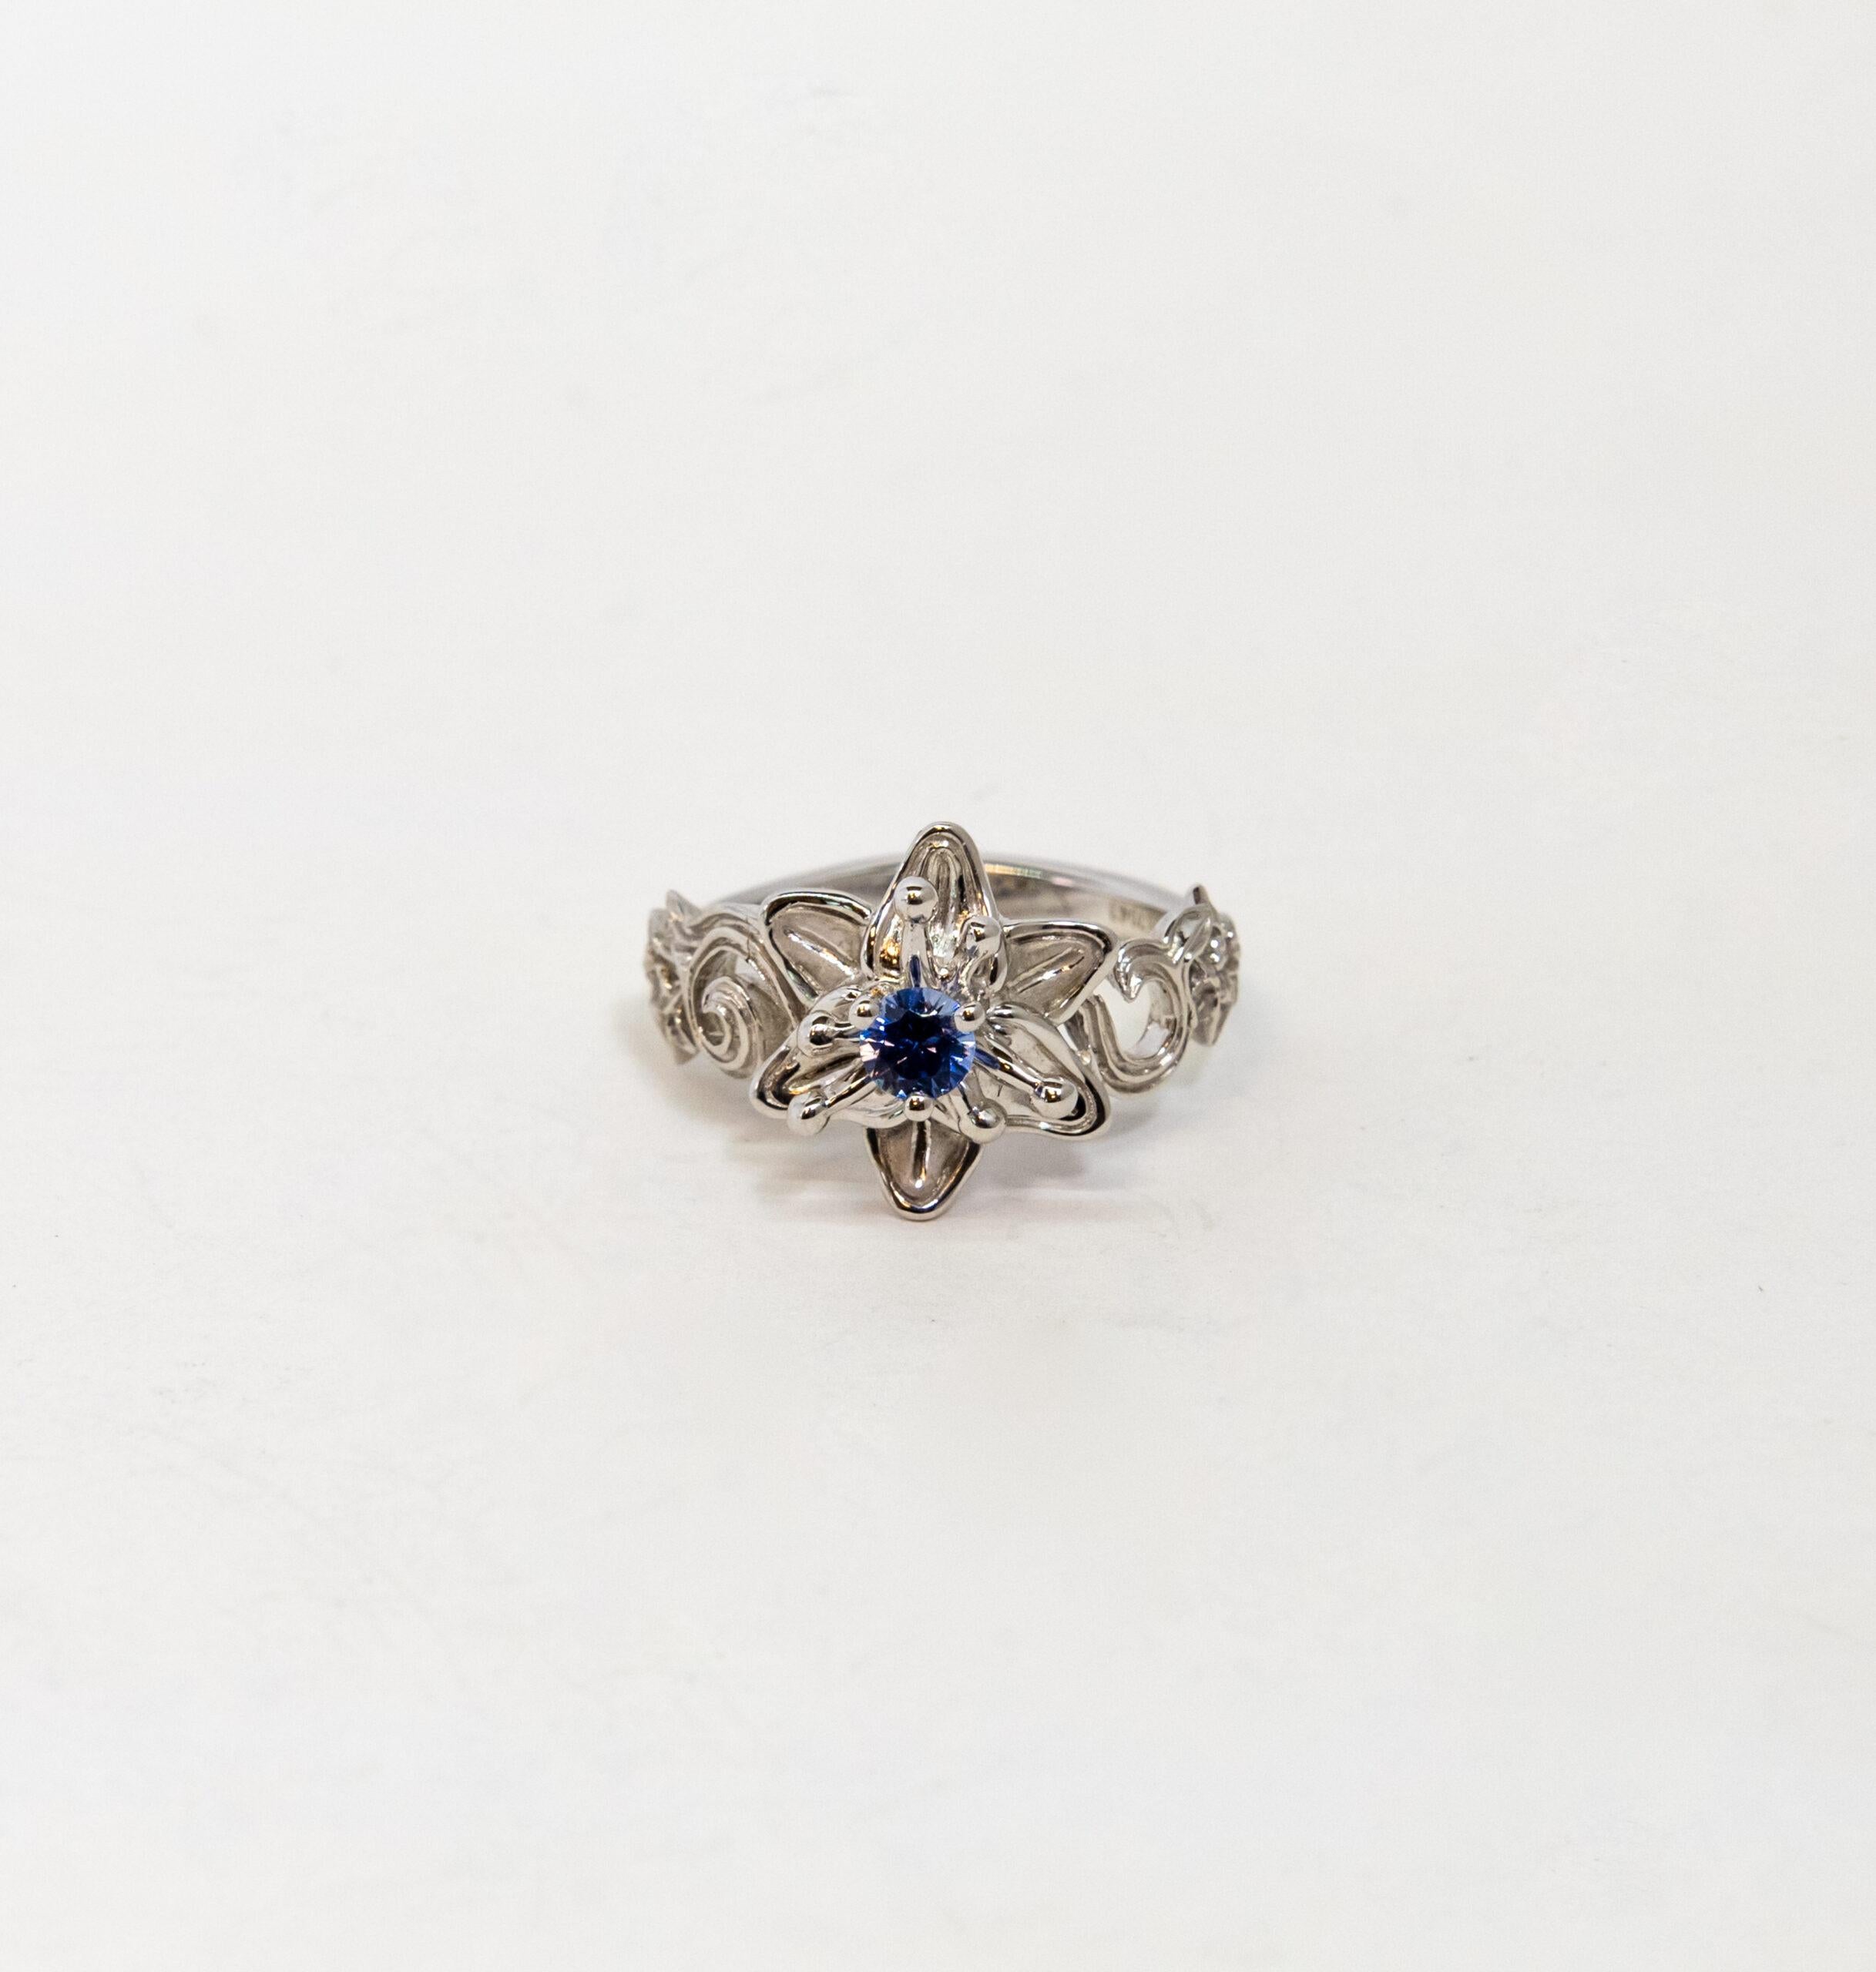 This ring is made of 18K White Gold. It is decorated as floral pattern with a round-cut blue Sapphire (~0.25ct).

Size – 54.5 (7 US)